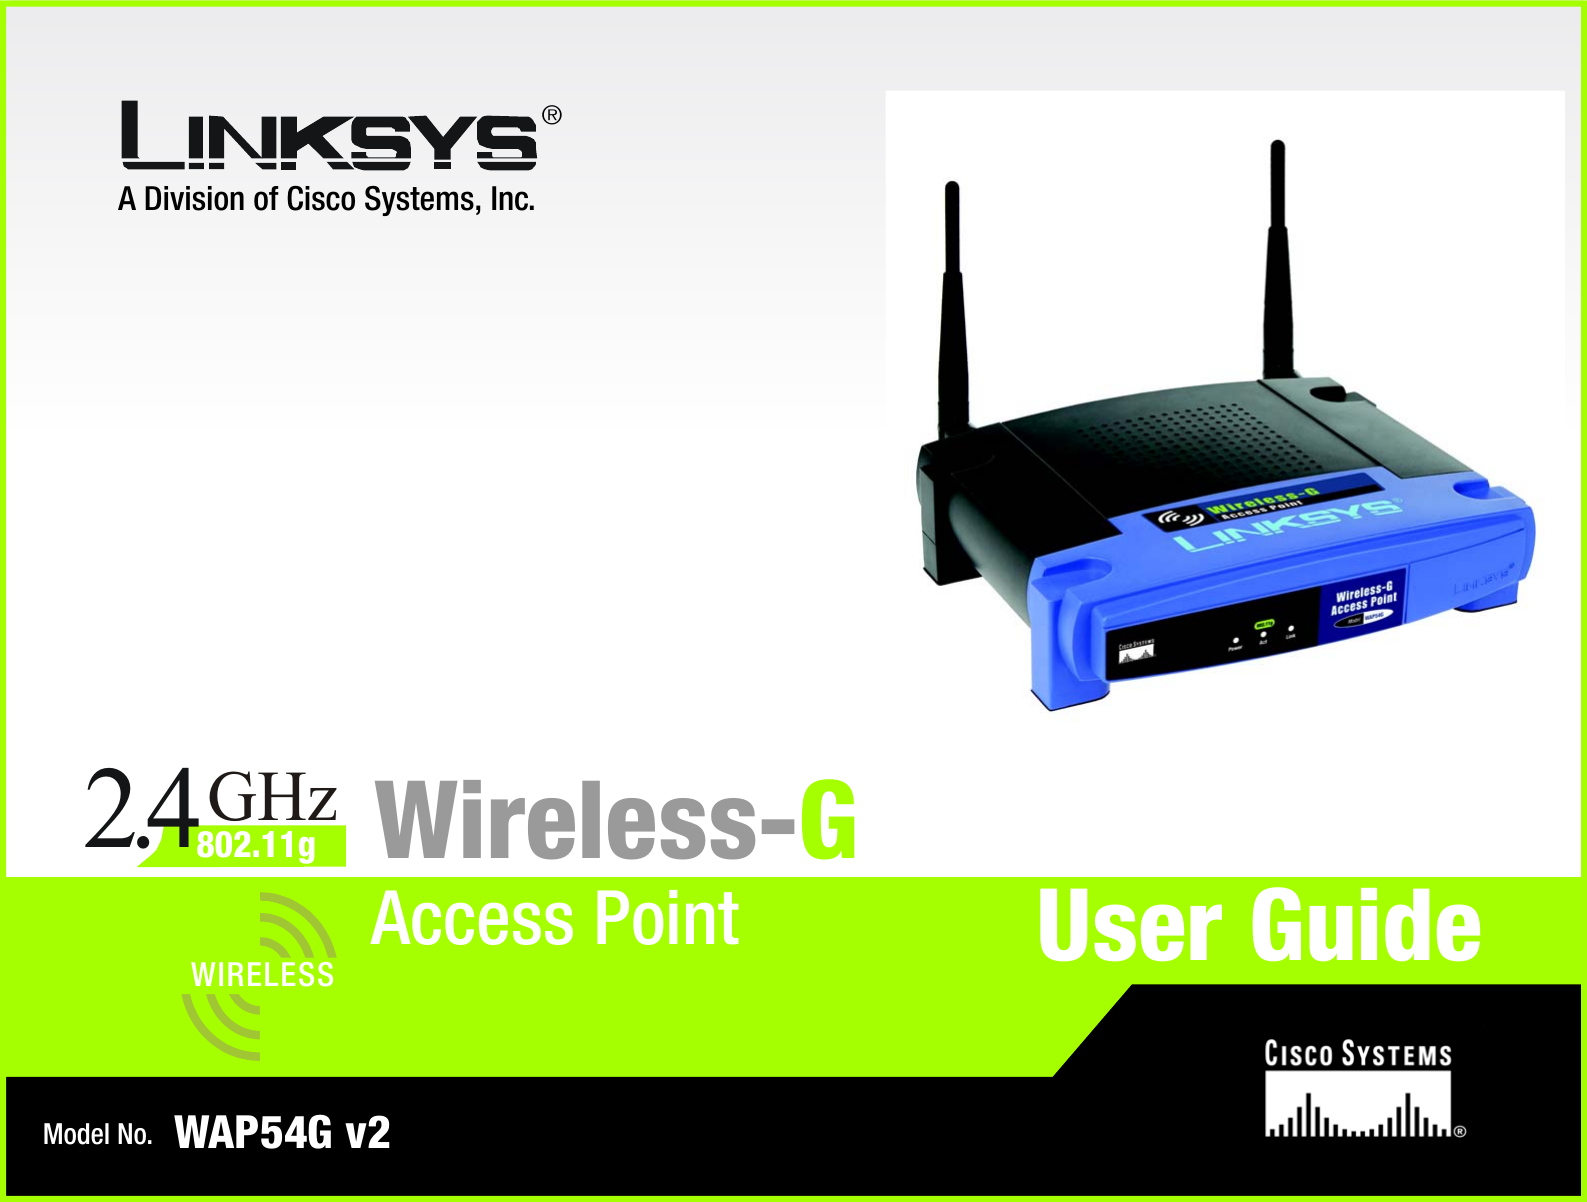 ® Access Point G User Guide WIRELESS 2.4802.11g A Division of Cisco Systems, Inc. Model No. Wireless-WAP54G v2 GHz 